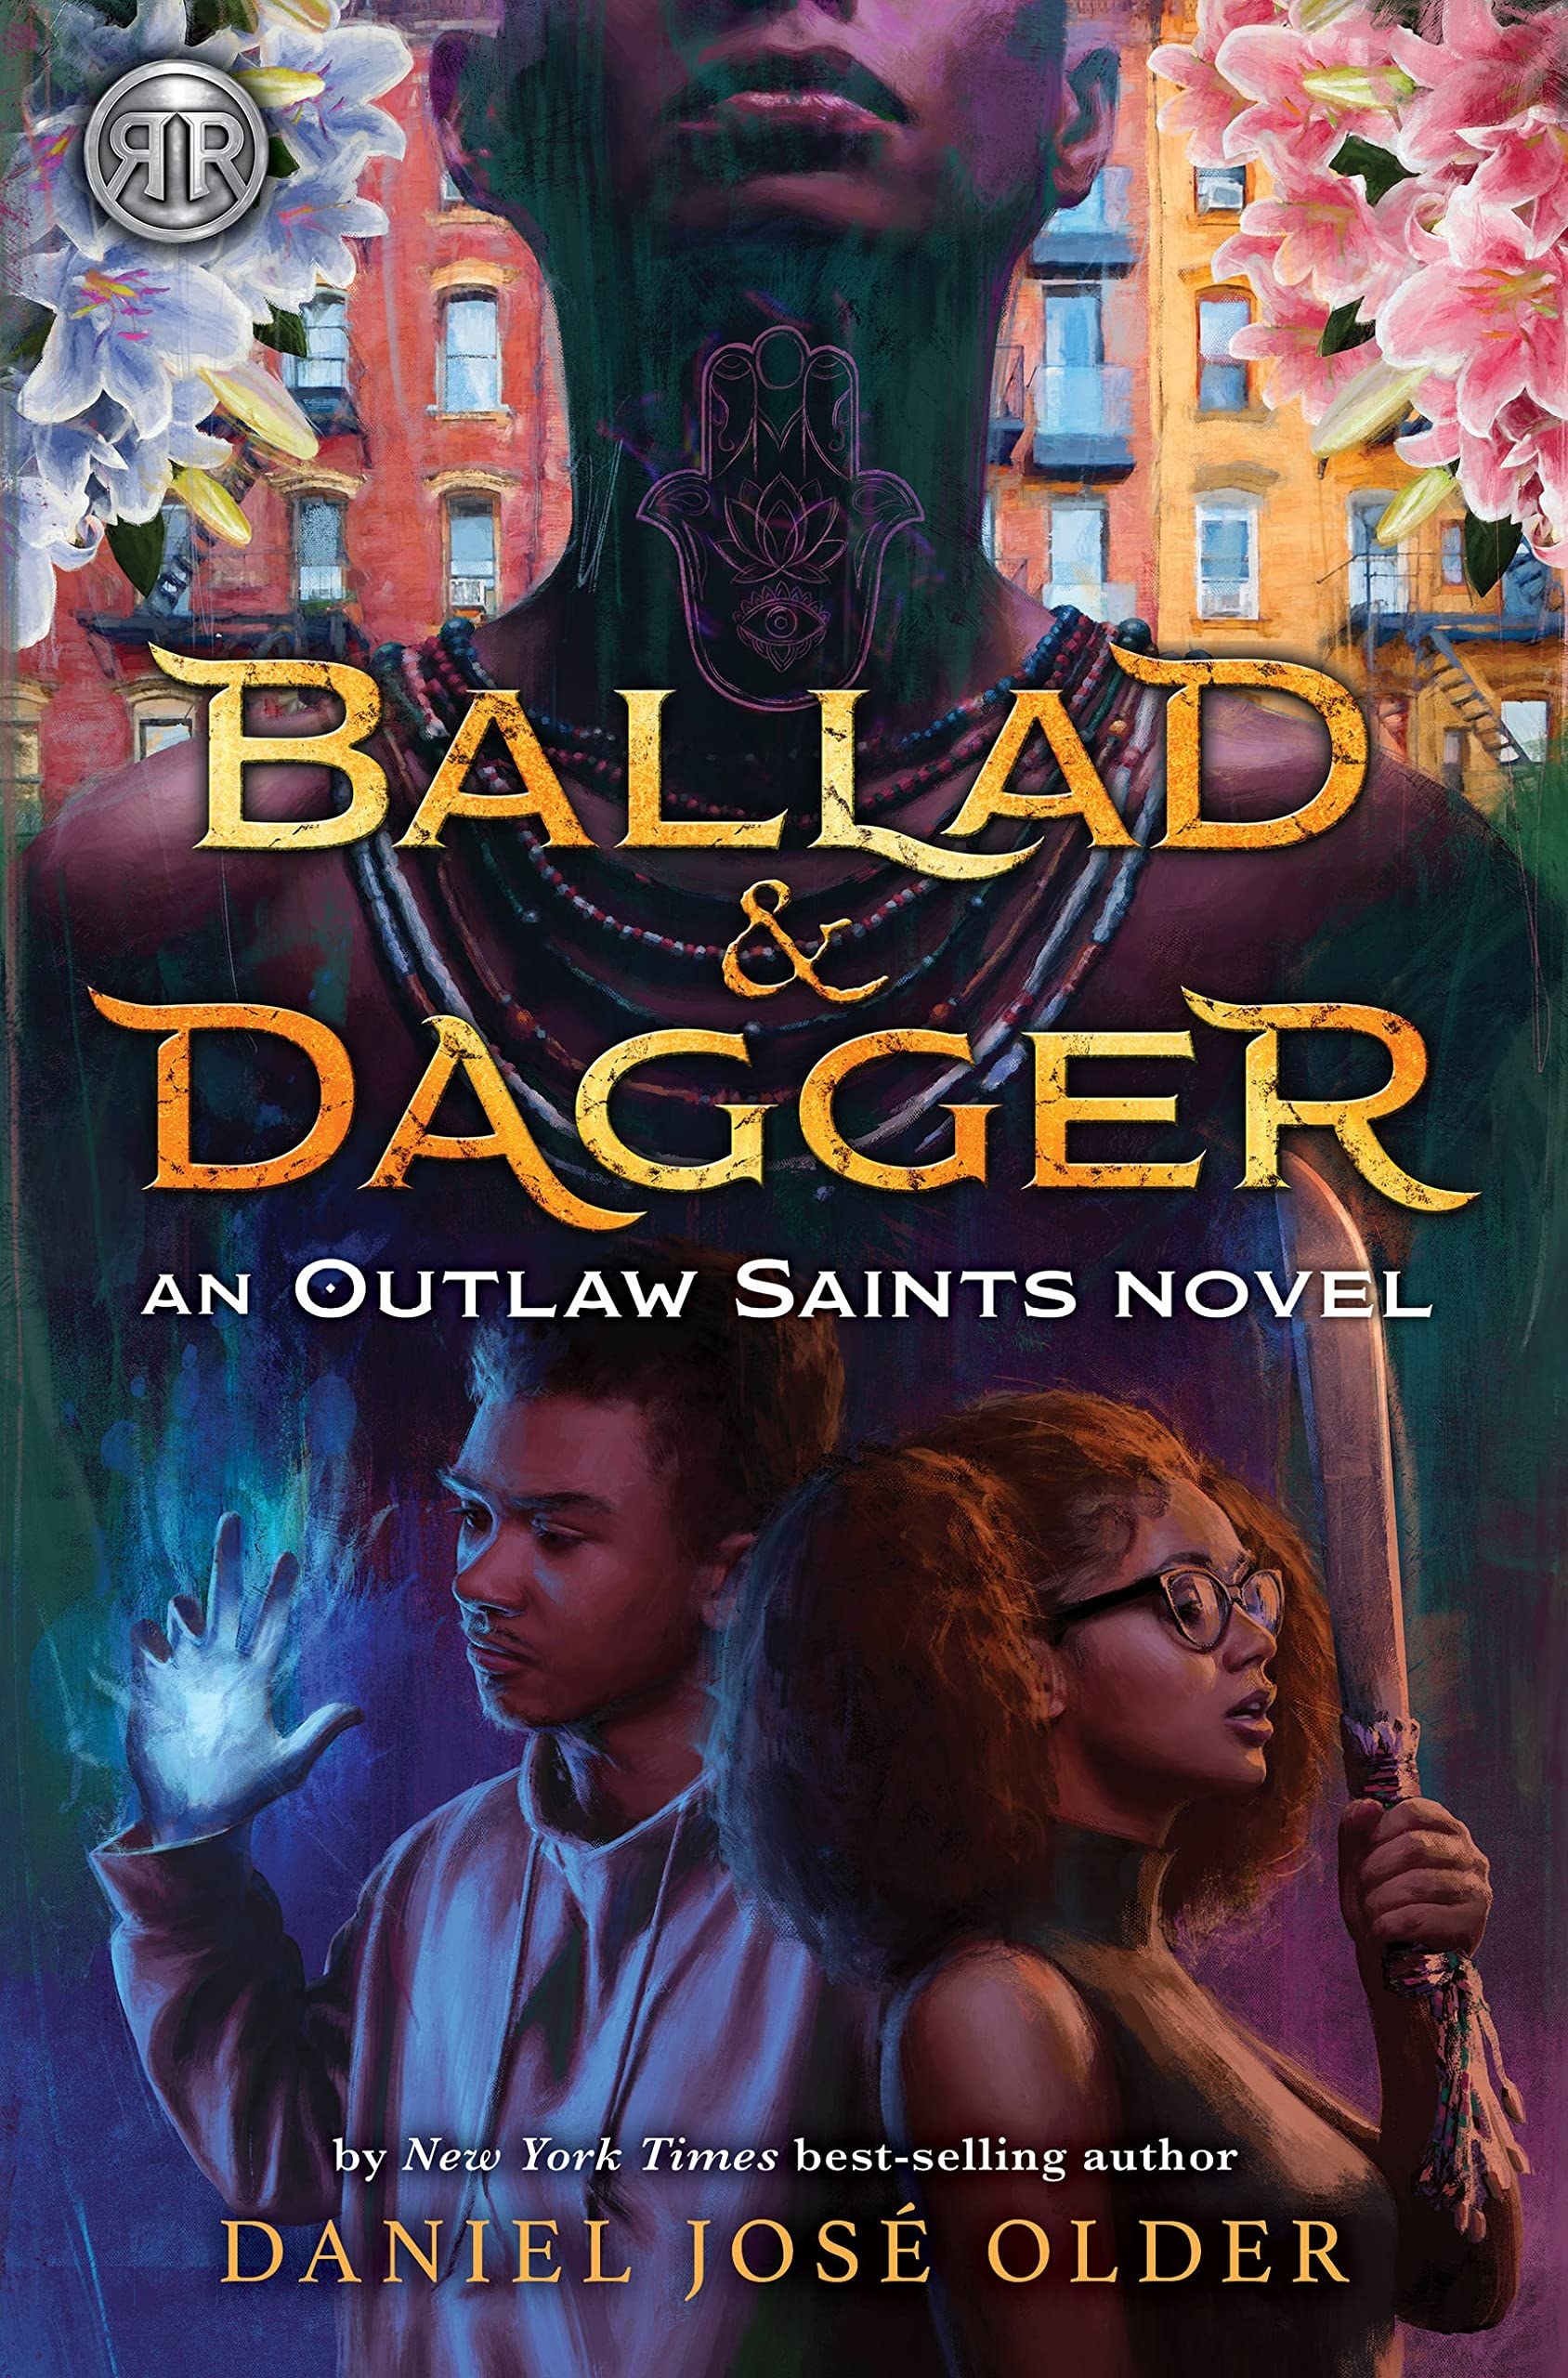 &quot;Ballad and Dagger&quot; cover illustration showing two teenagers wielding power